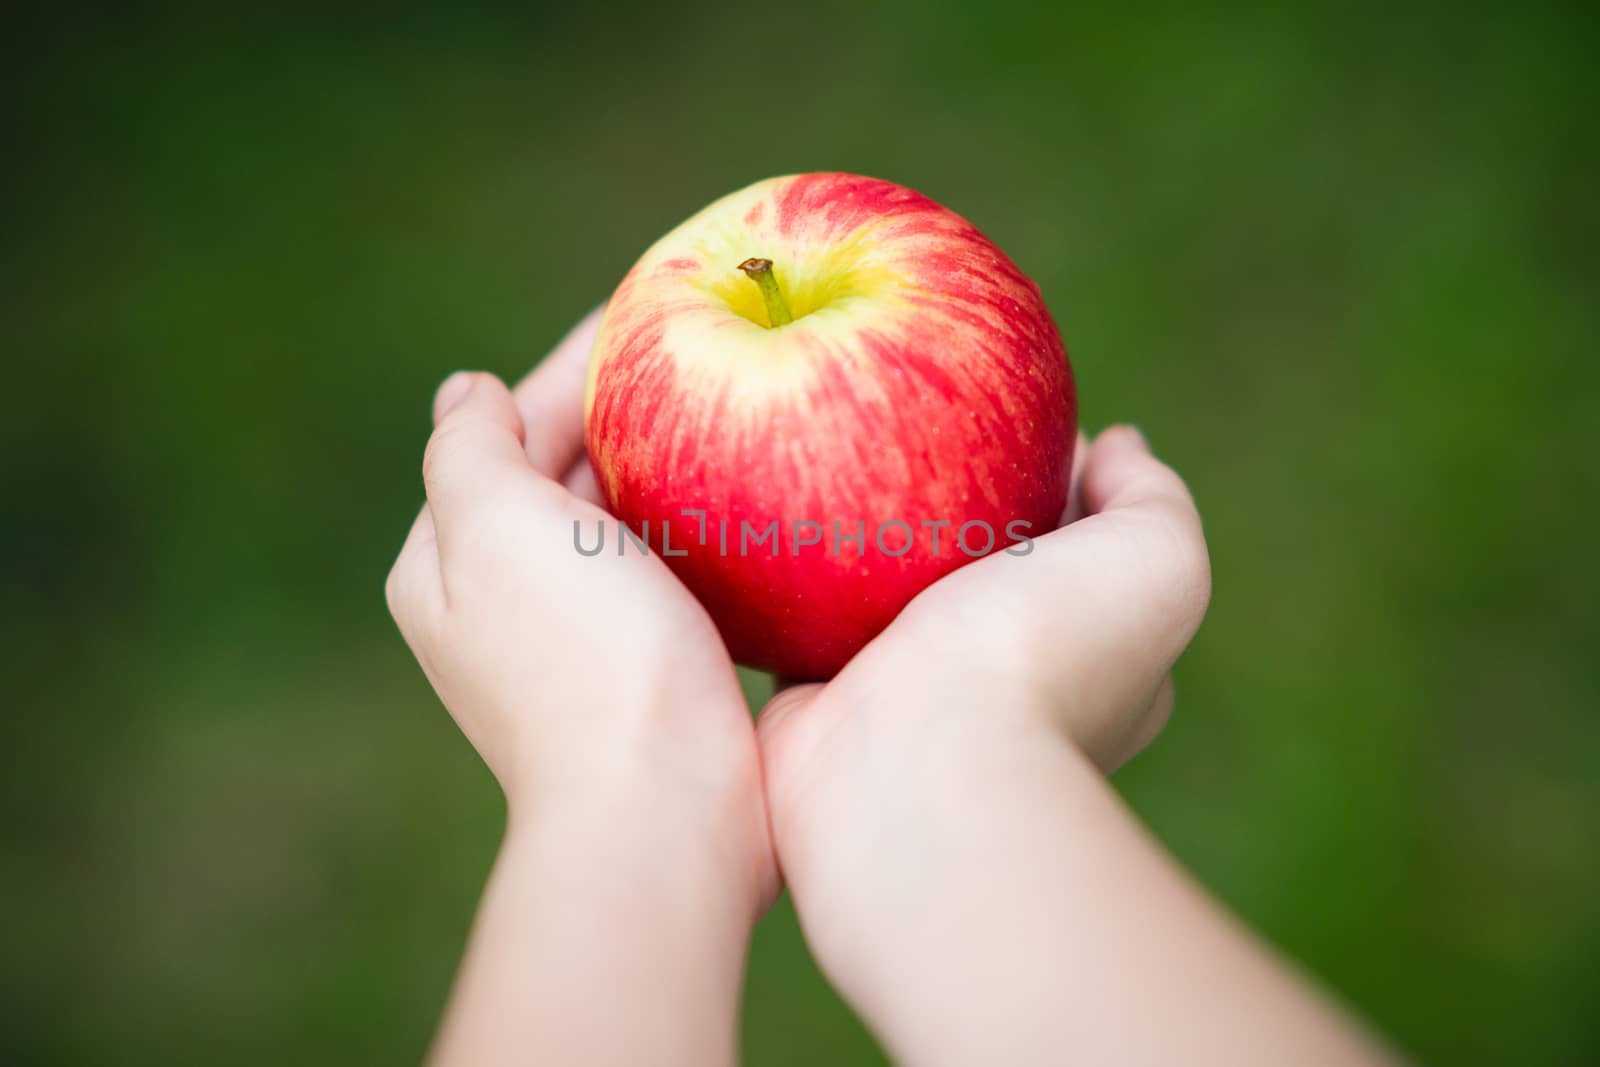 Hands holding apples illustrating concept of healthy lifestyle.